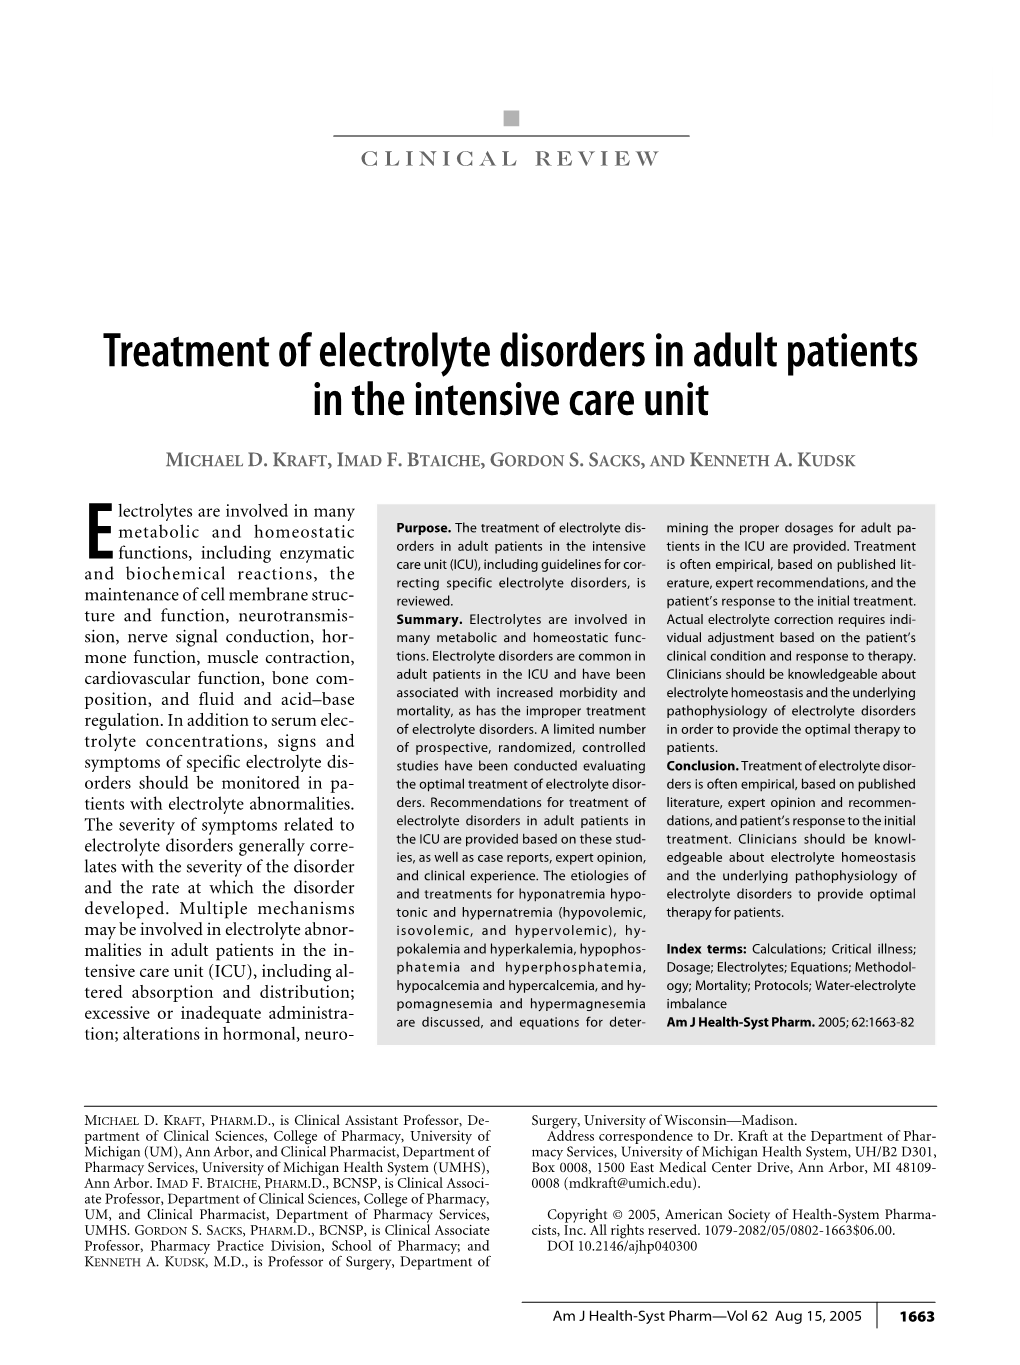 Treatment of Electrolyte Disorders in Adult Patients in the Intensive Care Unit